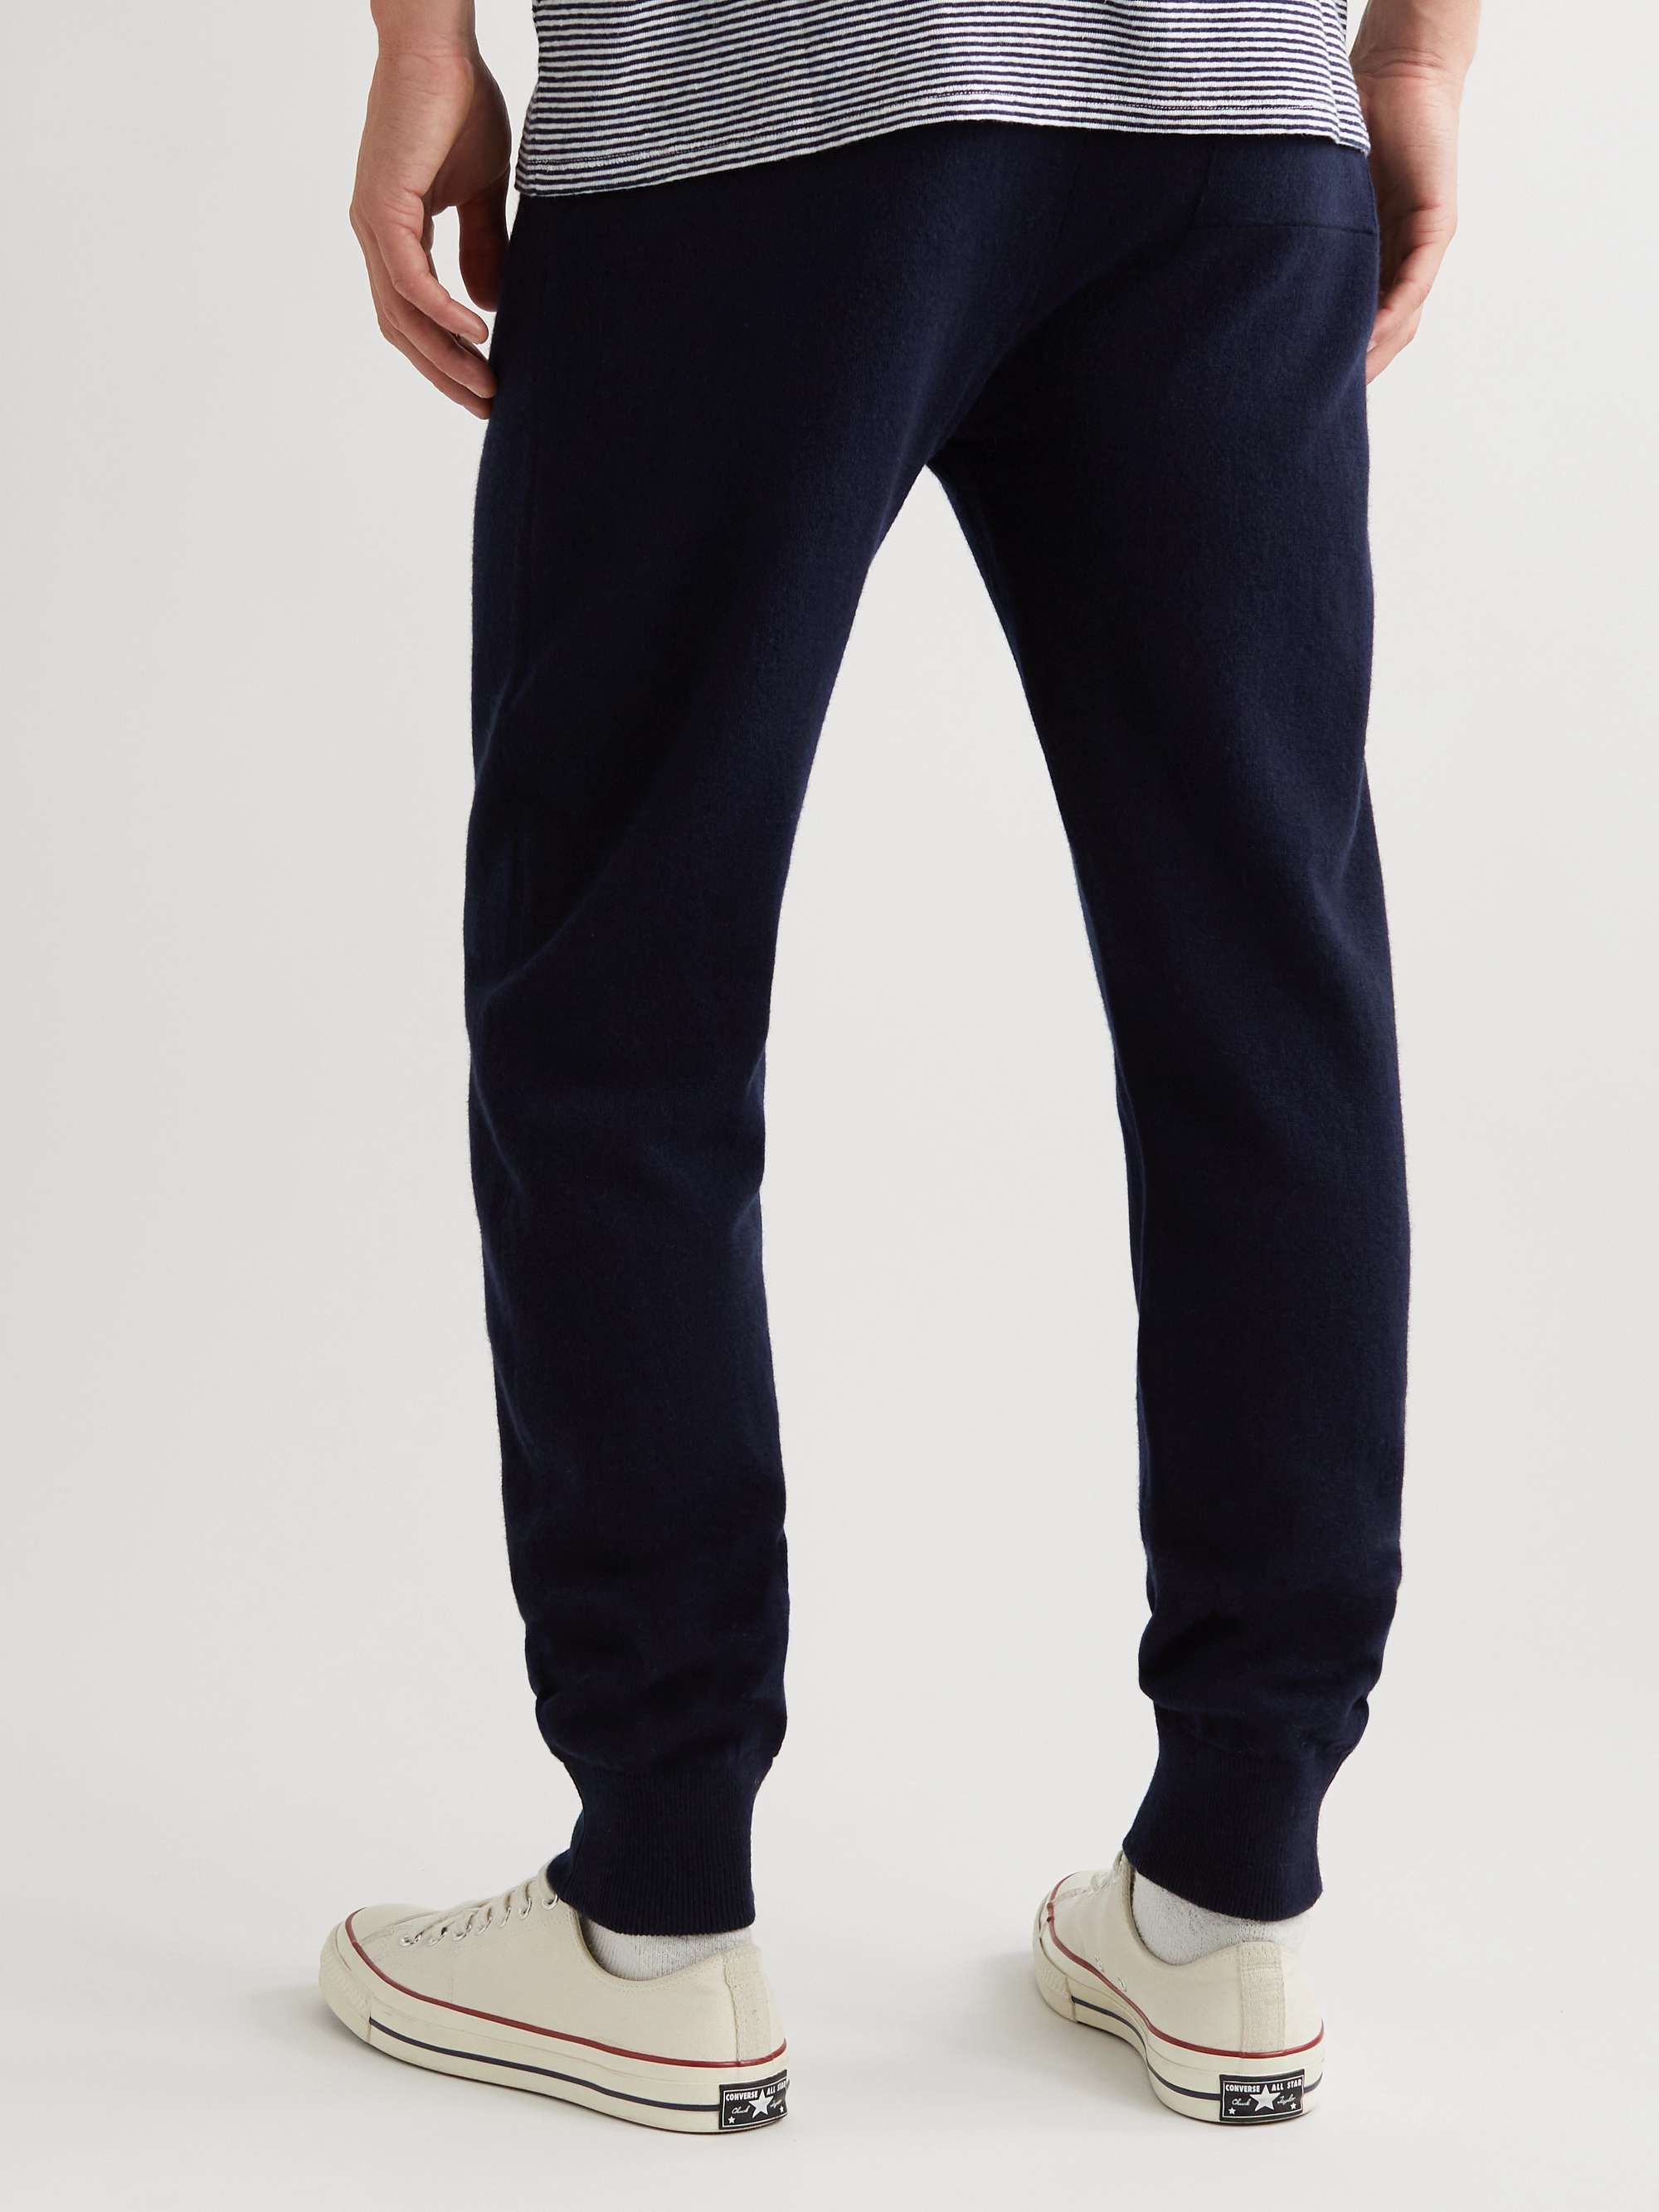 MR P. Tapered Pintucked Wool and Cashmere-Blend Sweatpants